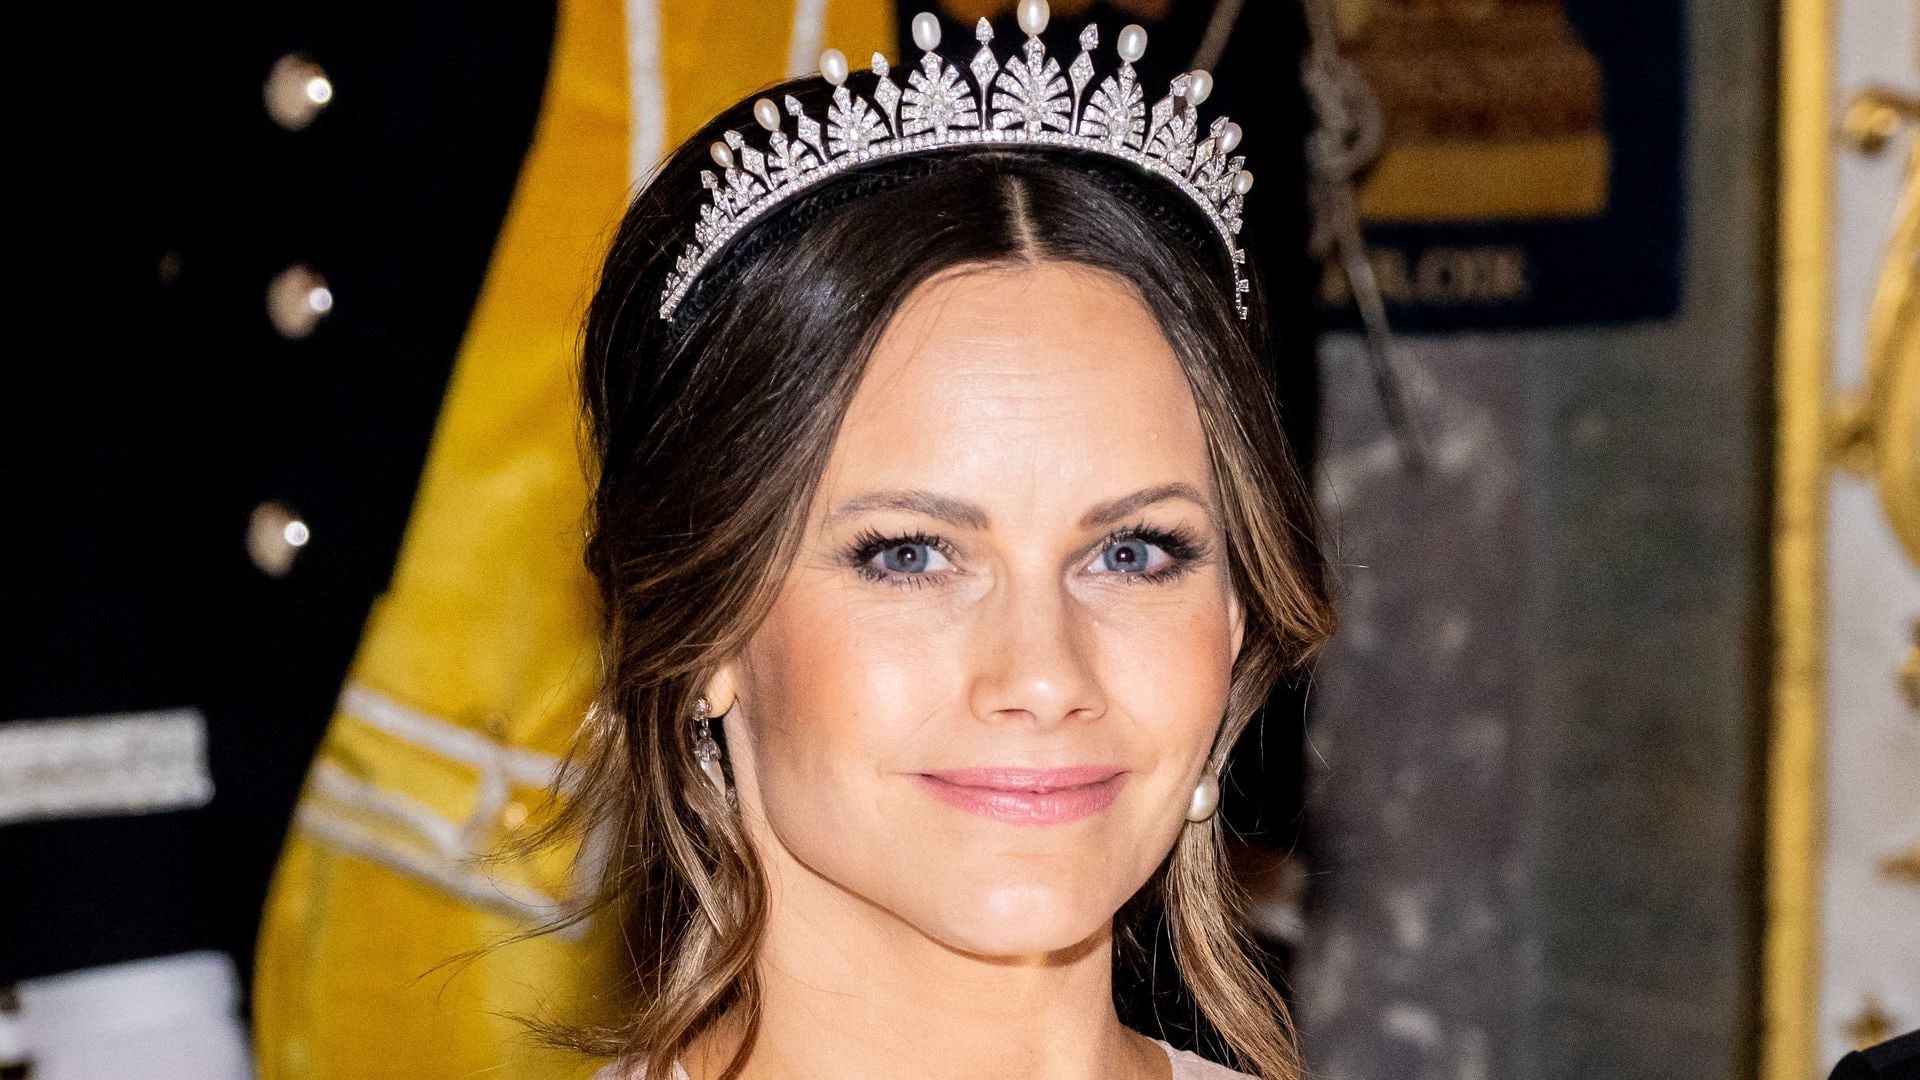 Princess Sofia of Sweden's dazzling satin gown is the ultimate royal dress moment